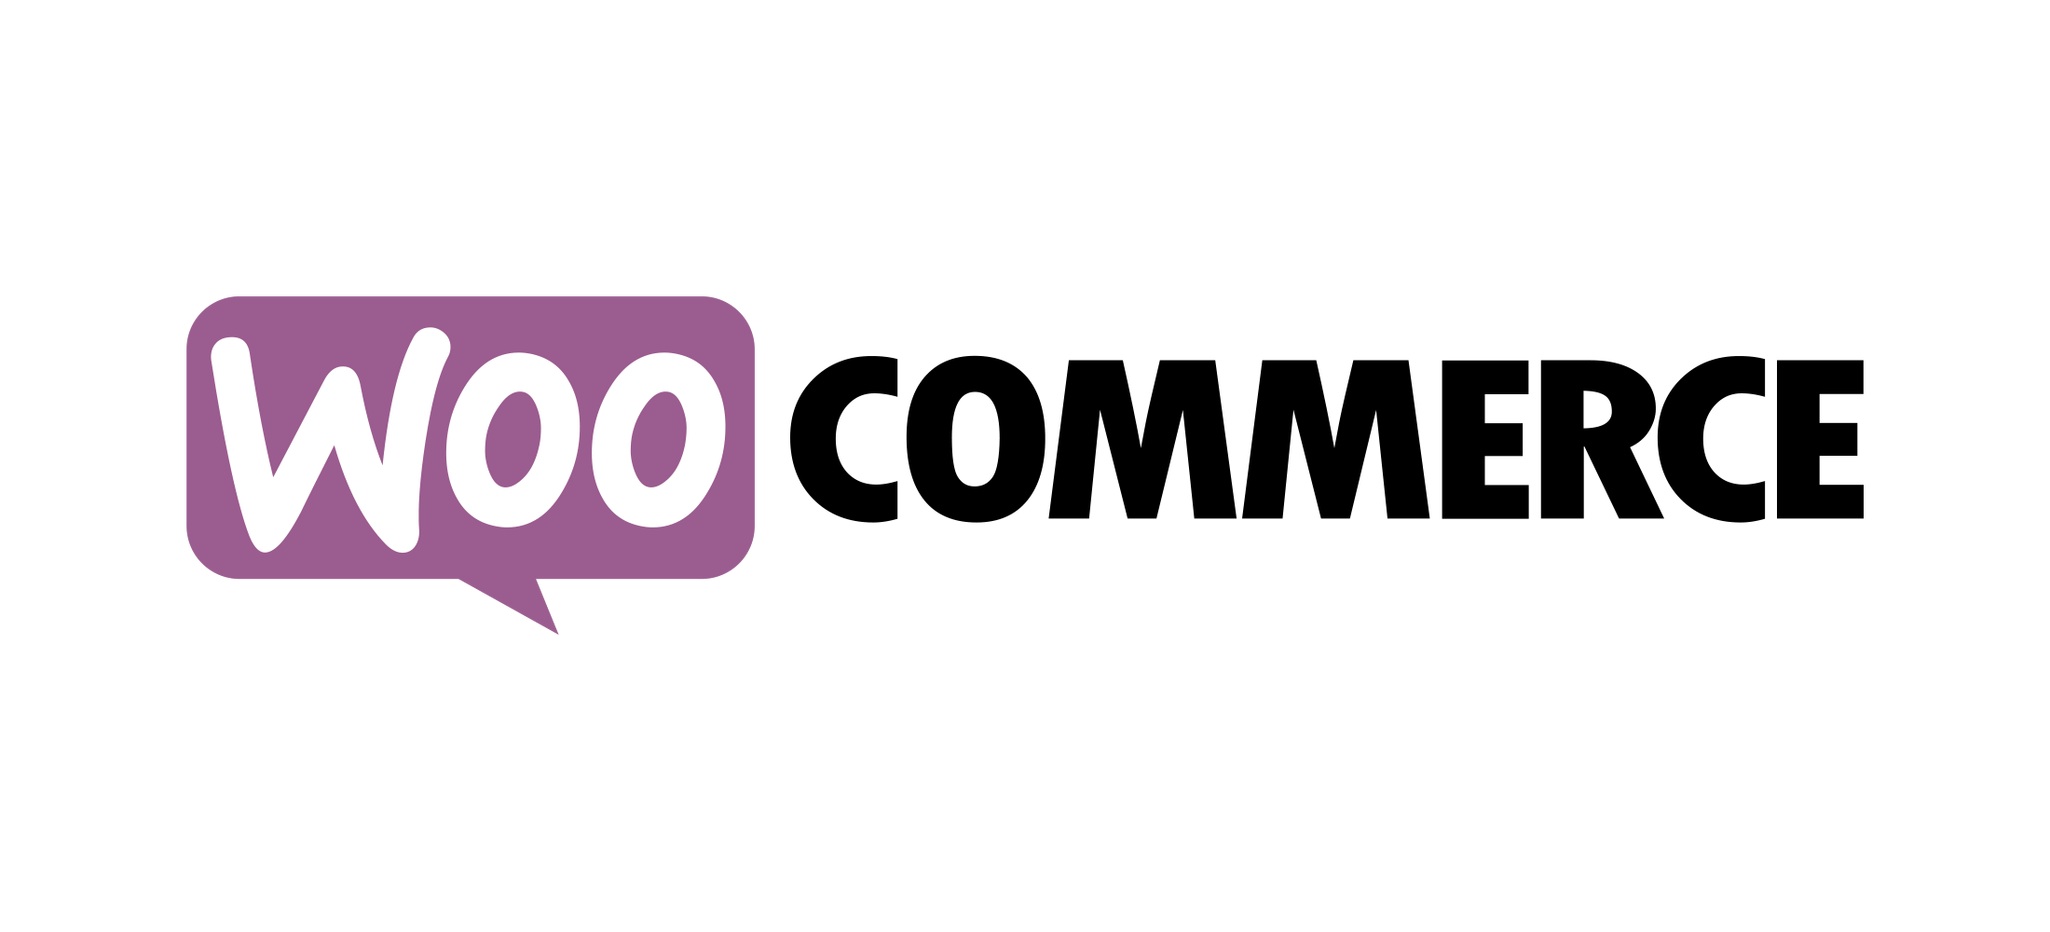 WooCommerce Patches Vulnerability that Allowed Spam Bots to Create Accounts at Checkout